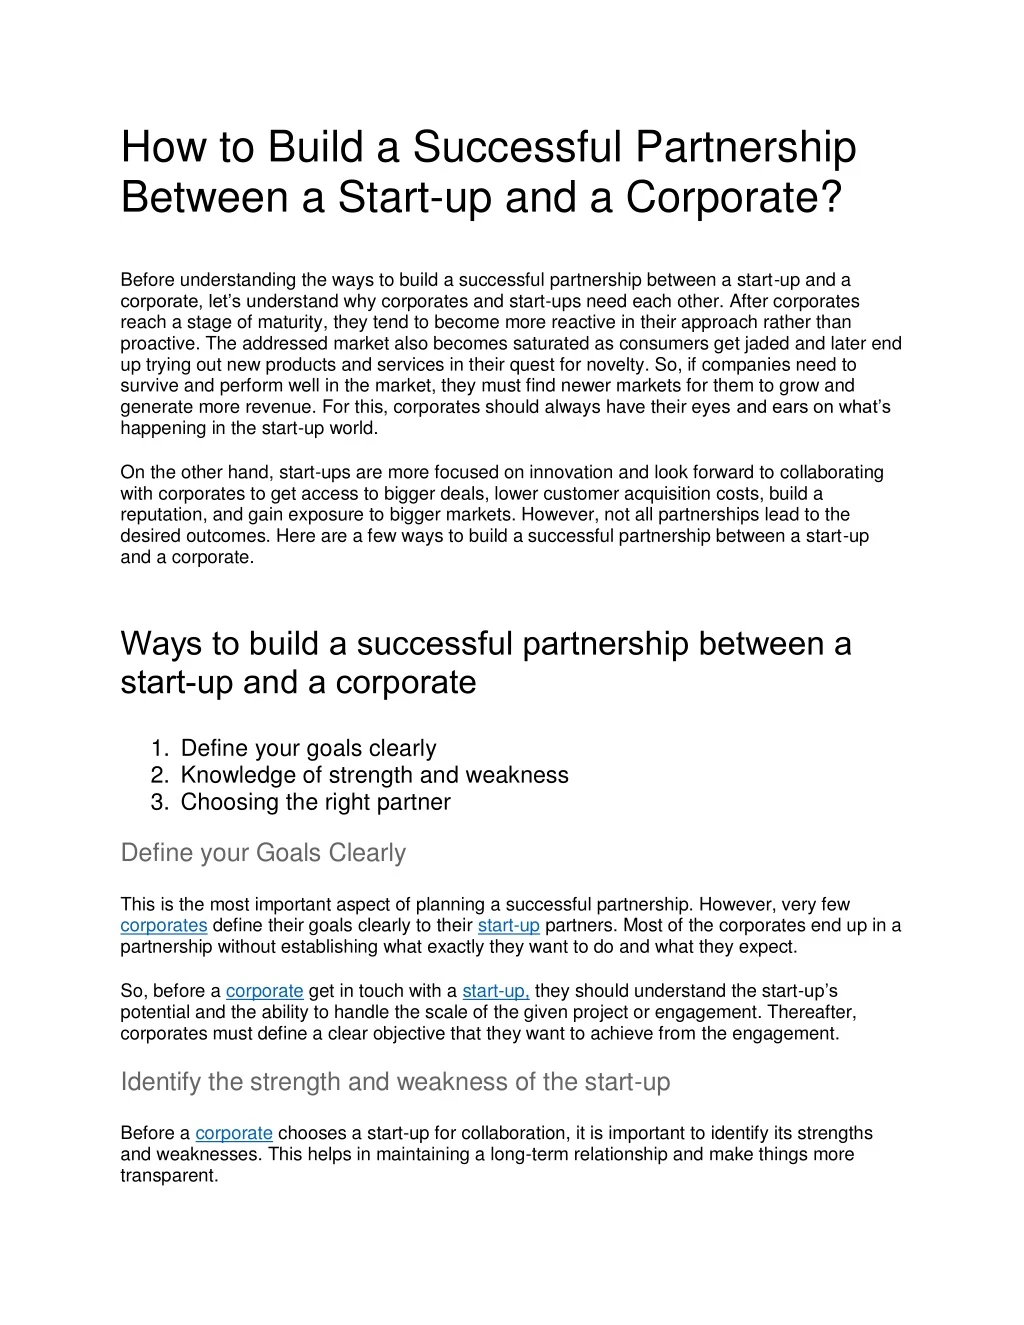 how to build a successful partnership between